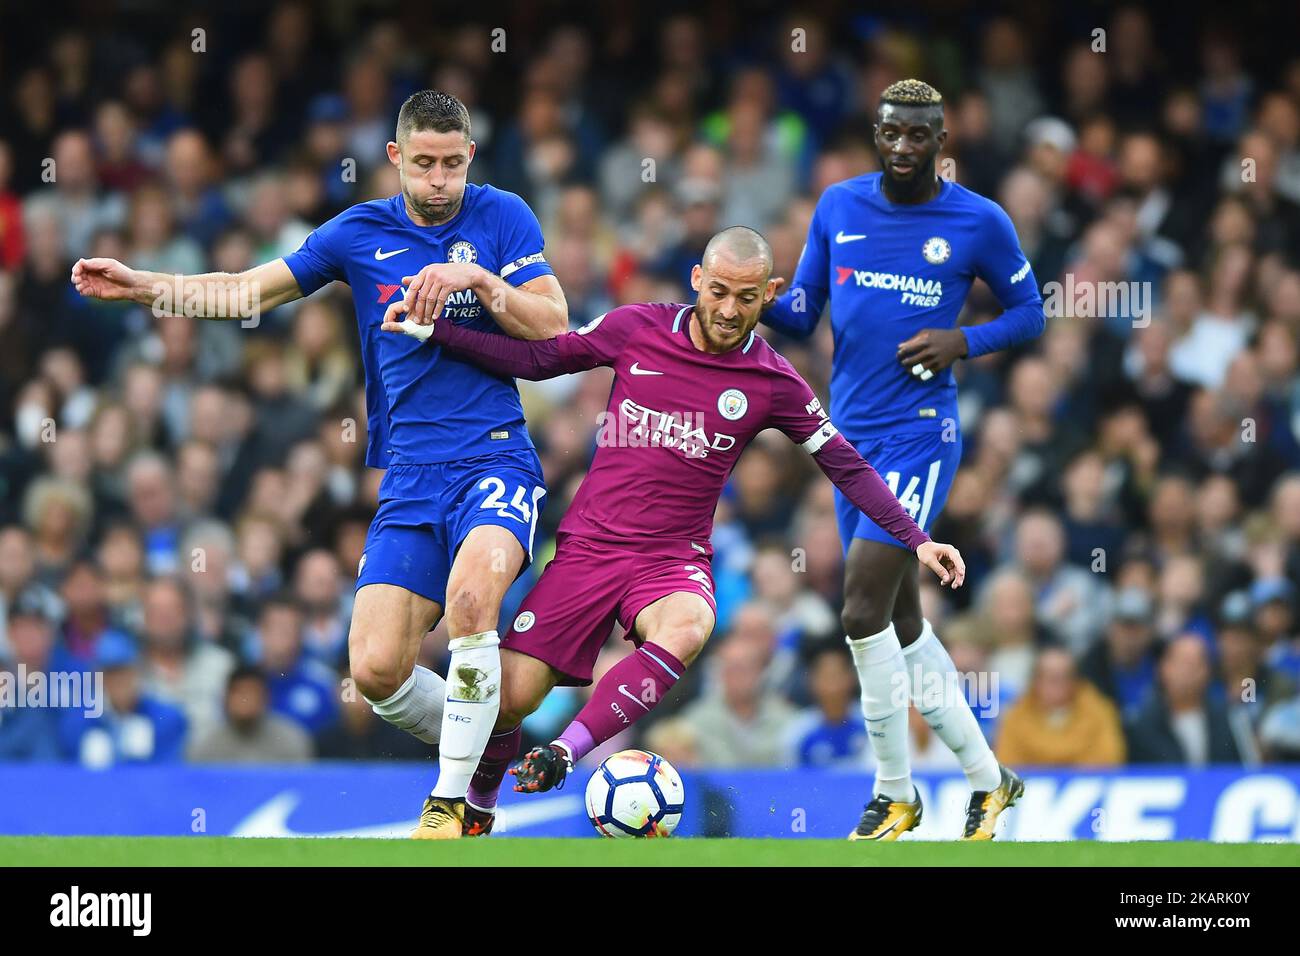 Manchester City midfielder David Silva (21) battles with Chelsea Defender Gary Cahill (24) during the Premier League match between Chelsea and Manchester City at Stamford Bridge, London, England on 30 Sept 2016. (Photo by Kieran Galvin/NurPhoto) Stock Photo